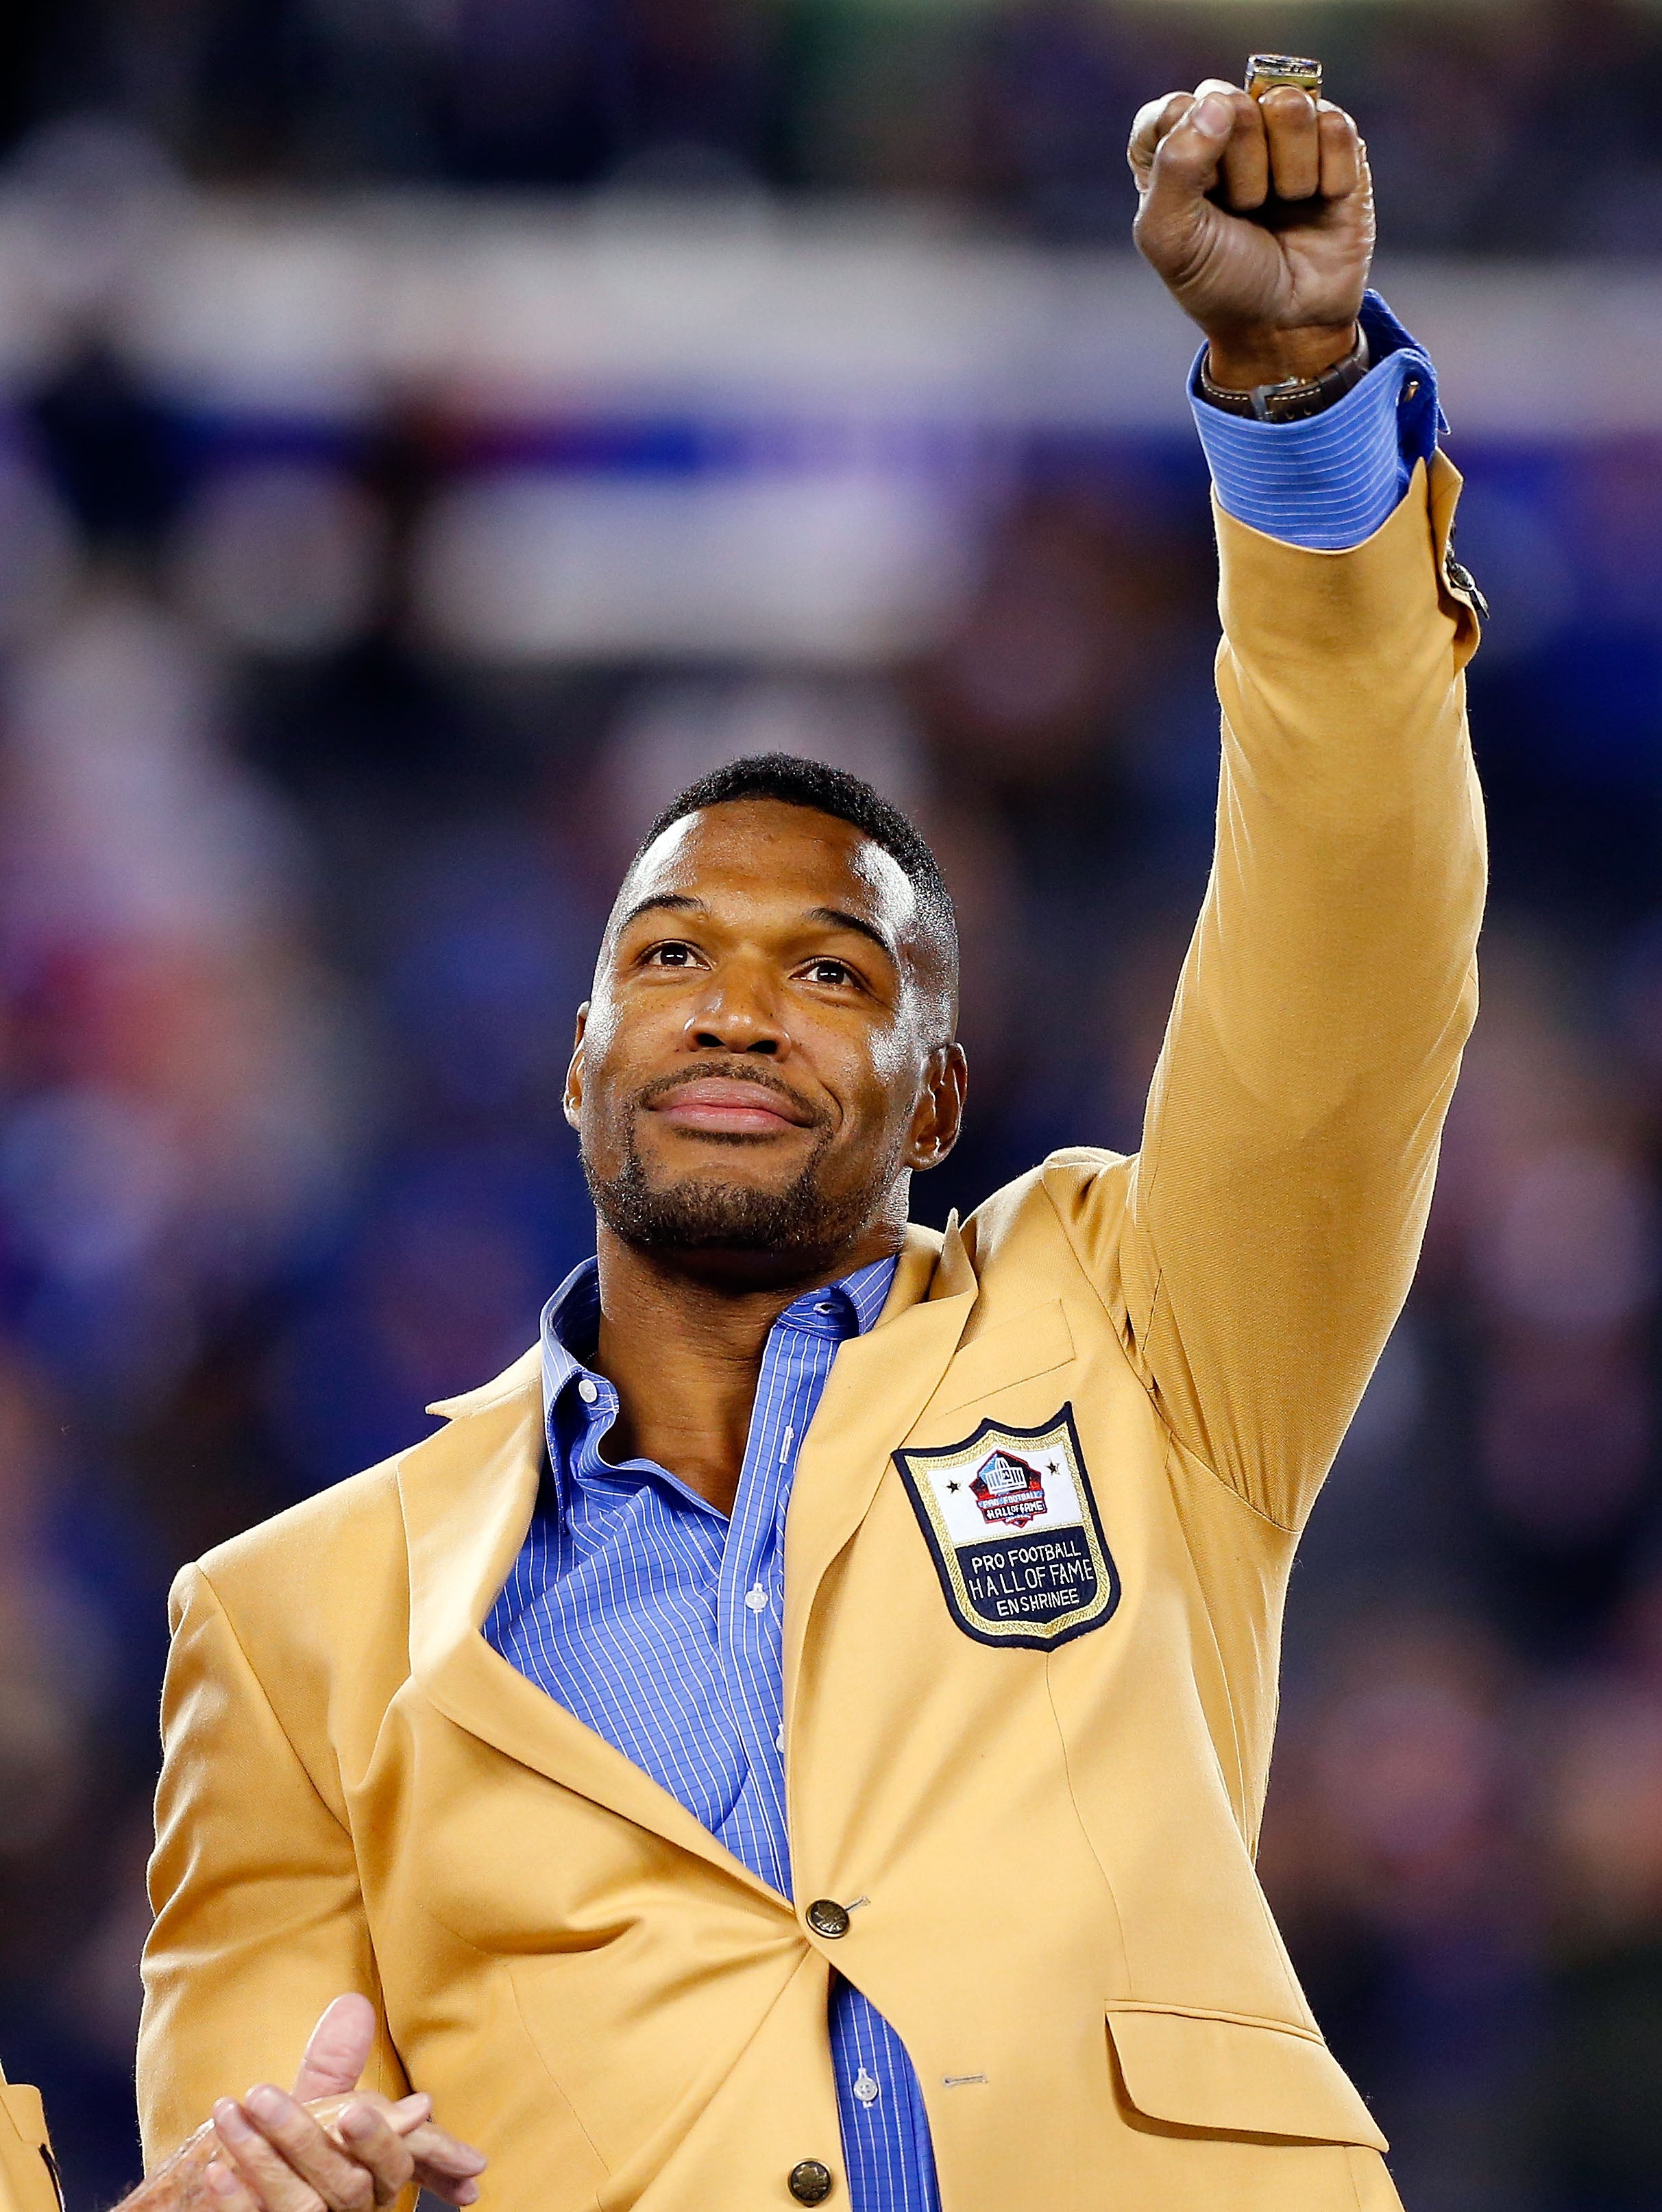 15 NFL Stars Who Hail From HBCUs
